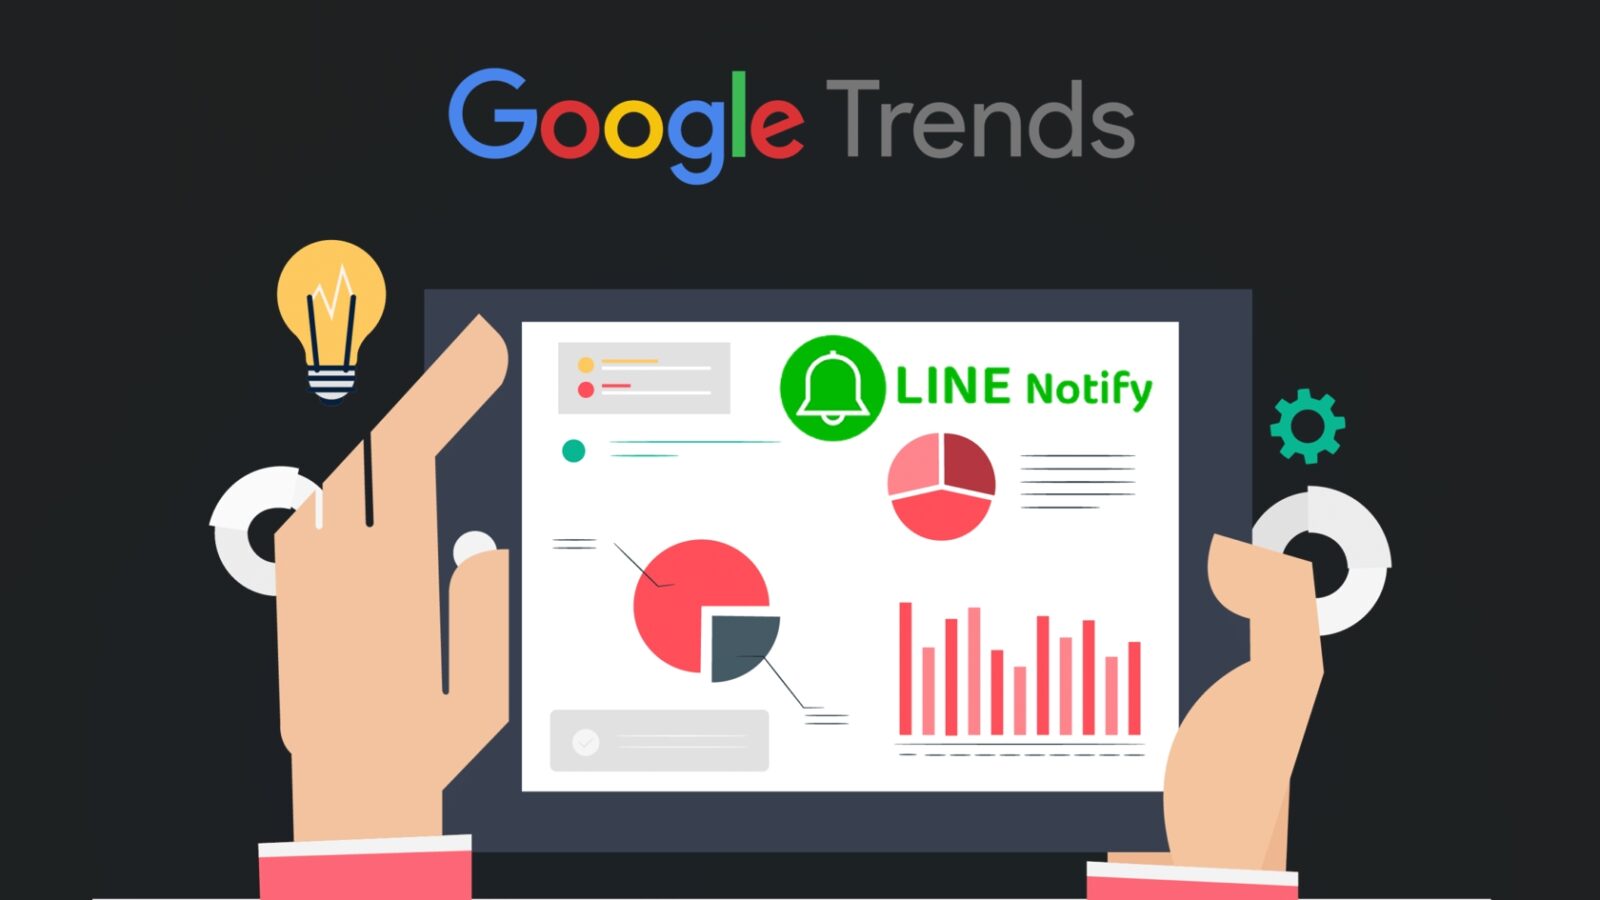 google-trends-to-line-notify-13